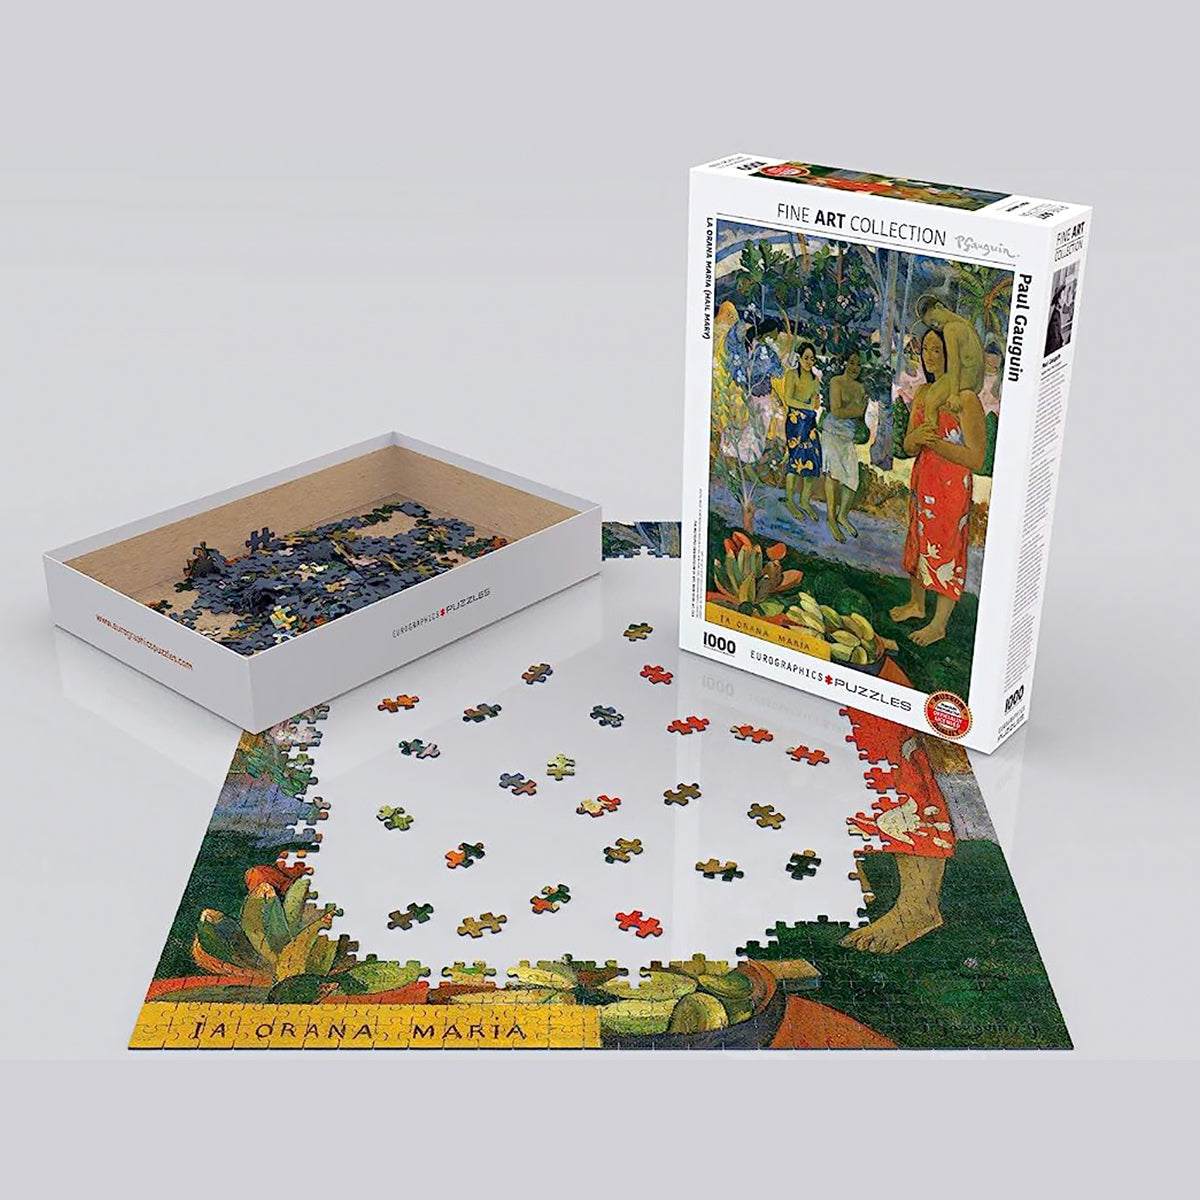 Rest In Pieces brand presents the Eurographics Fine Art Collection's Paul Gauguin La Orana Maria puzzle, a must-have for art lovers.